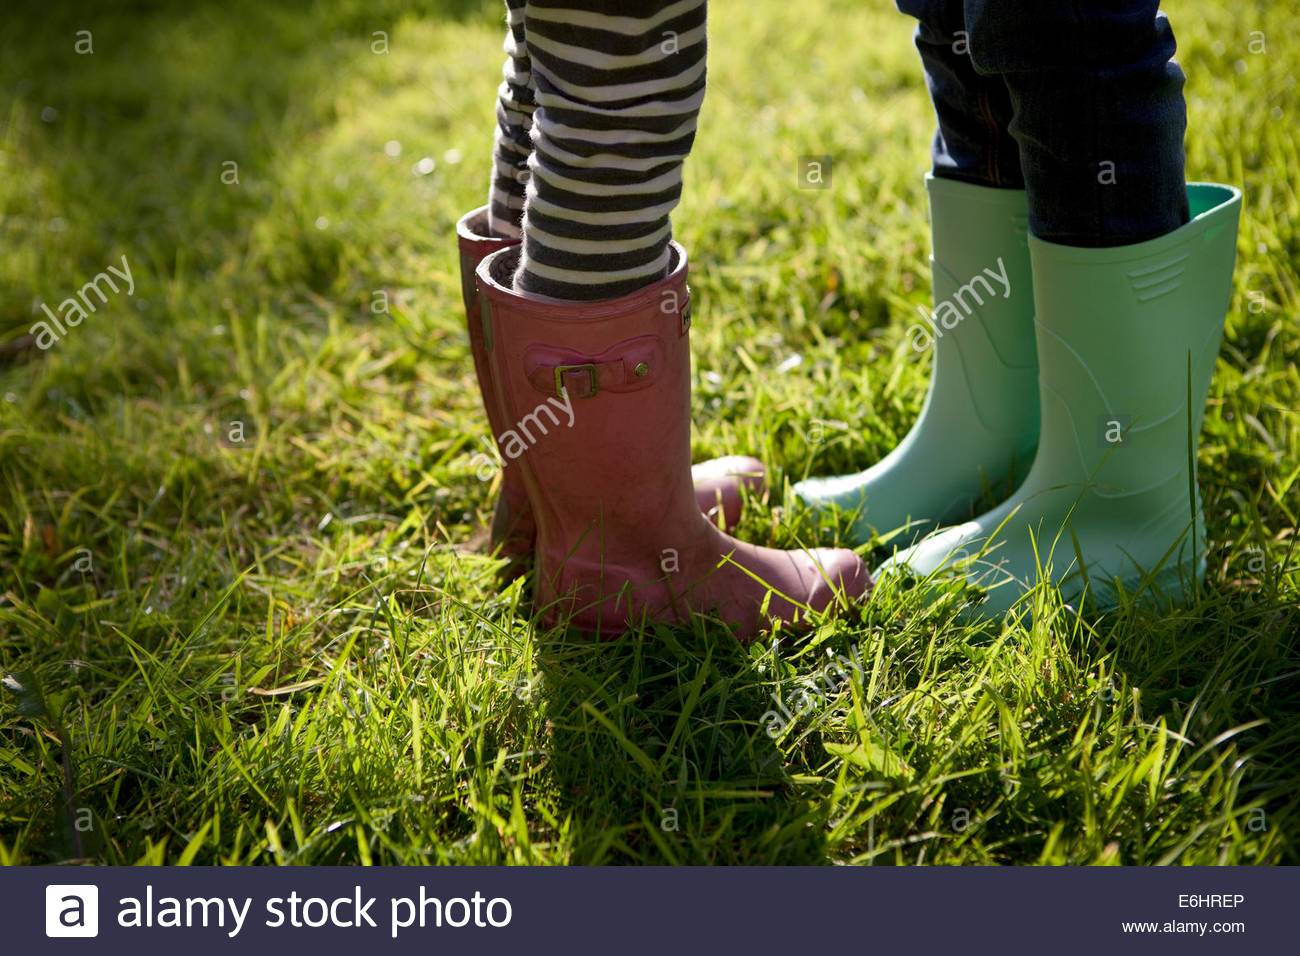 Pink Wellies Stock Photos & Pink Wellies Stock Images - Alamy